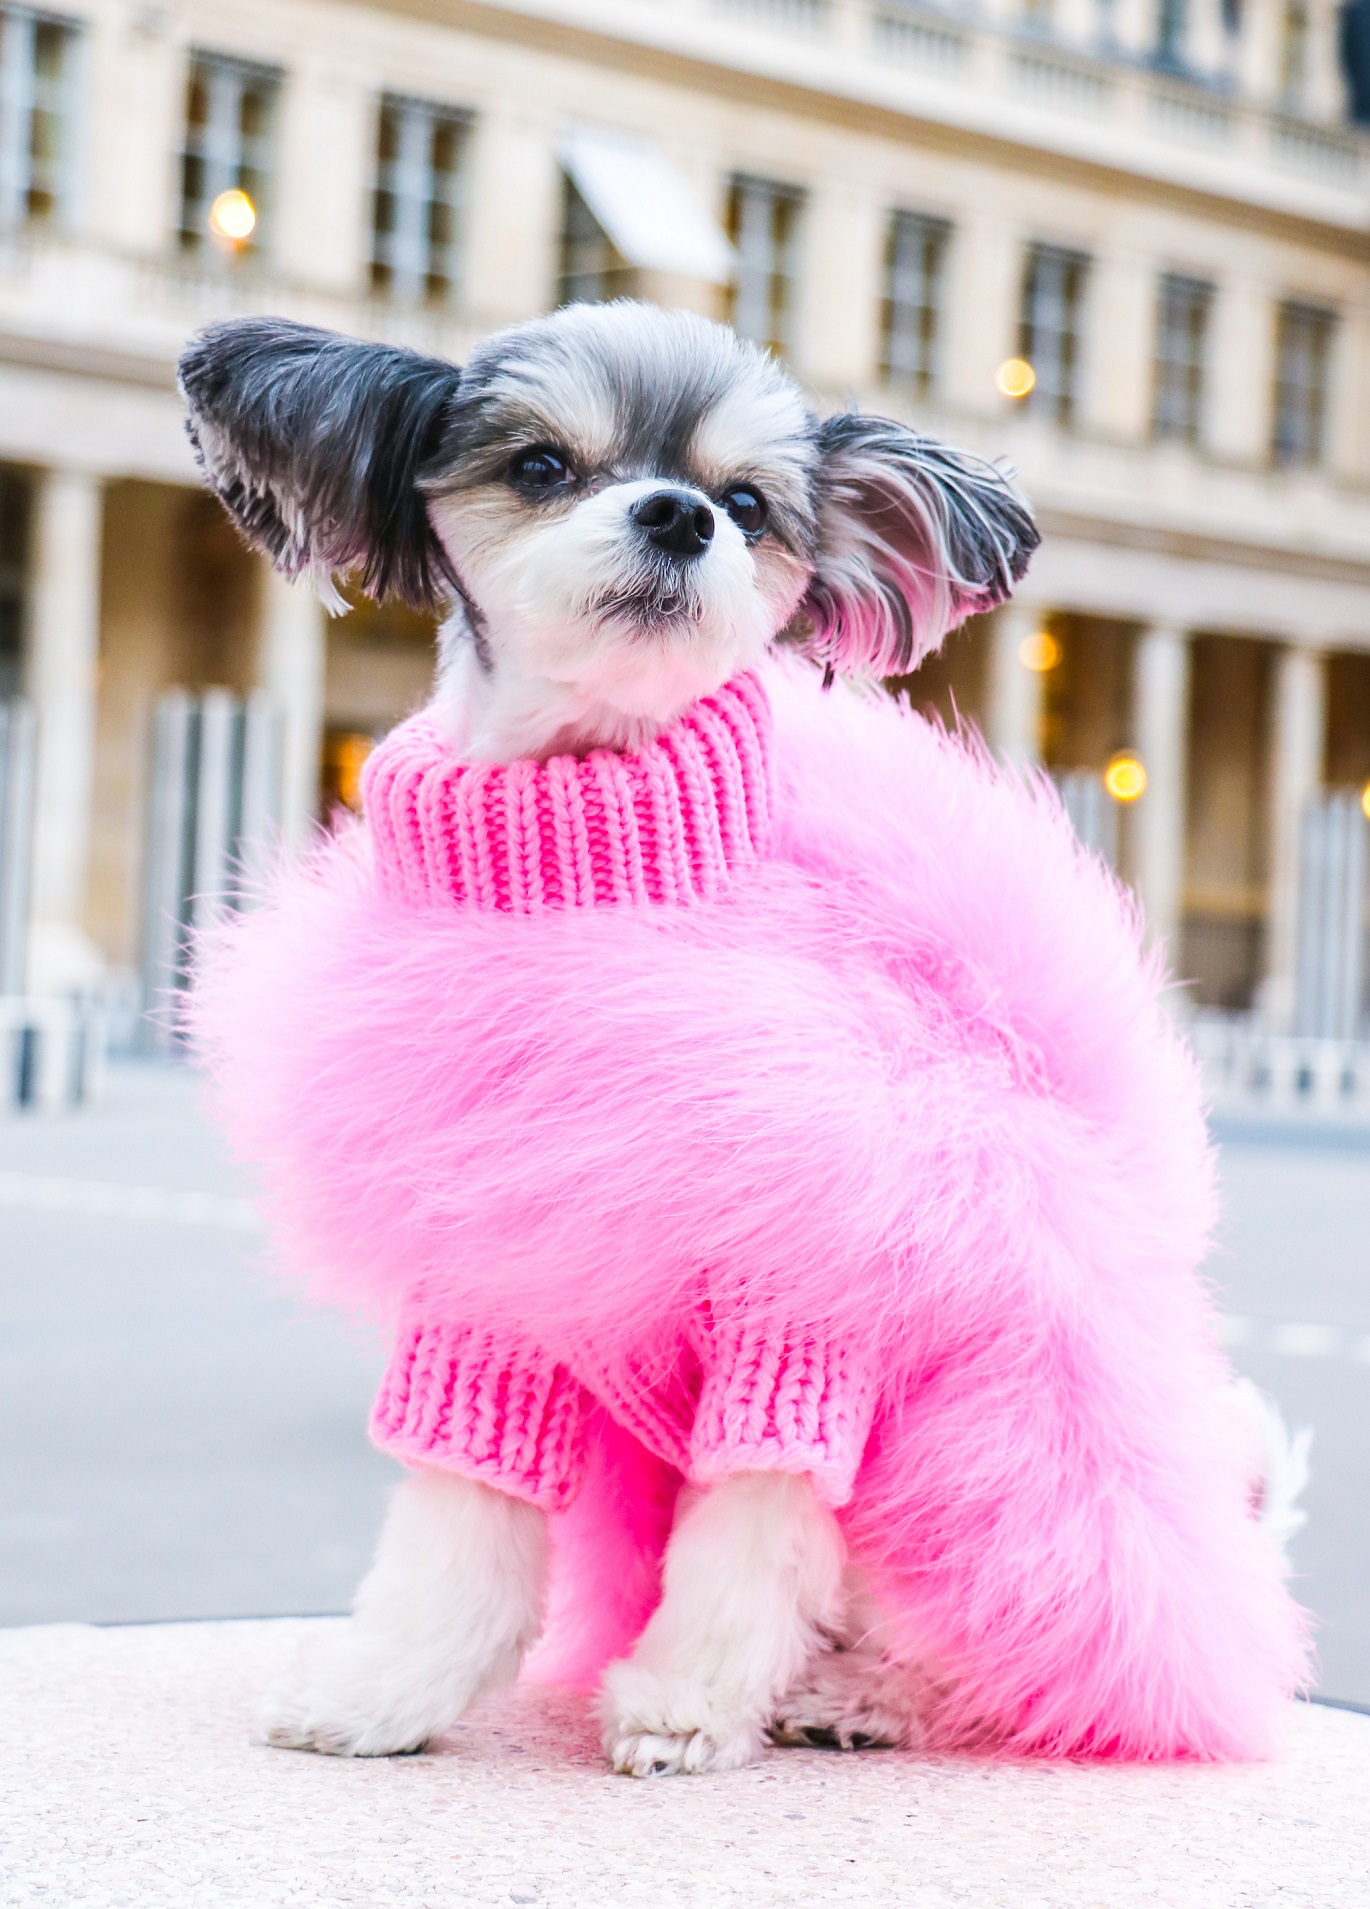 The internet is living for this dog's spiky, neon-pink outfit to